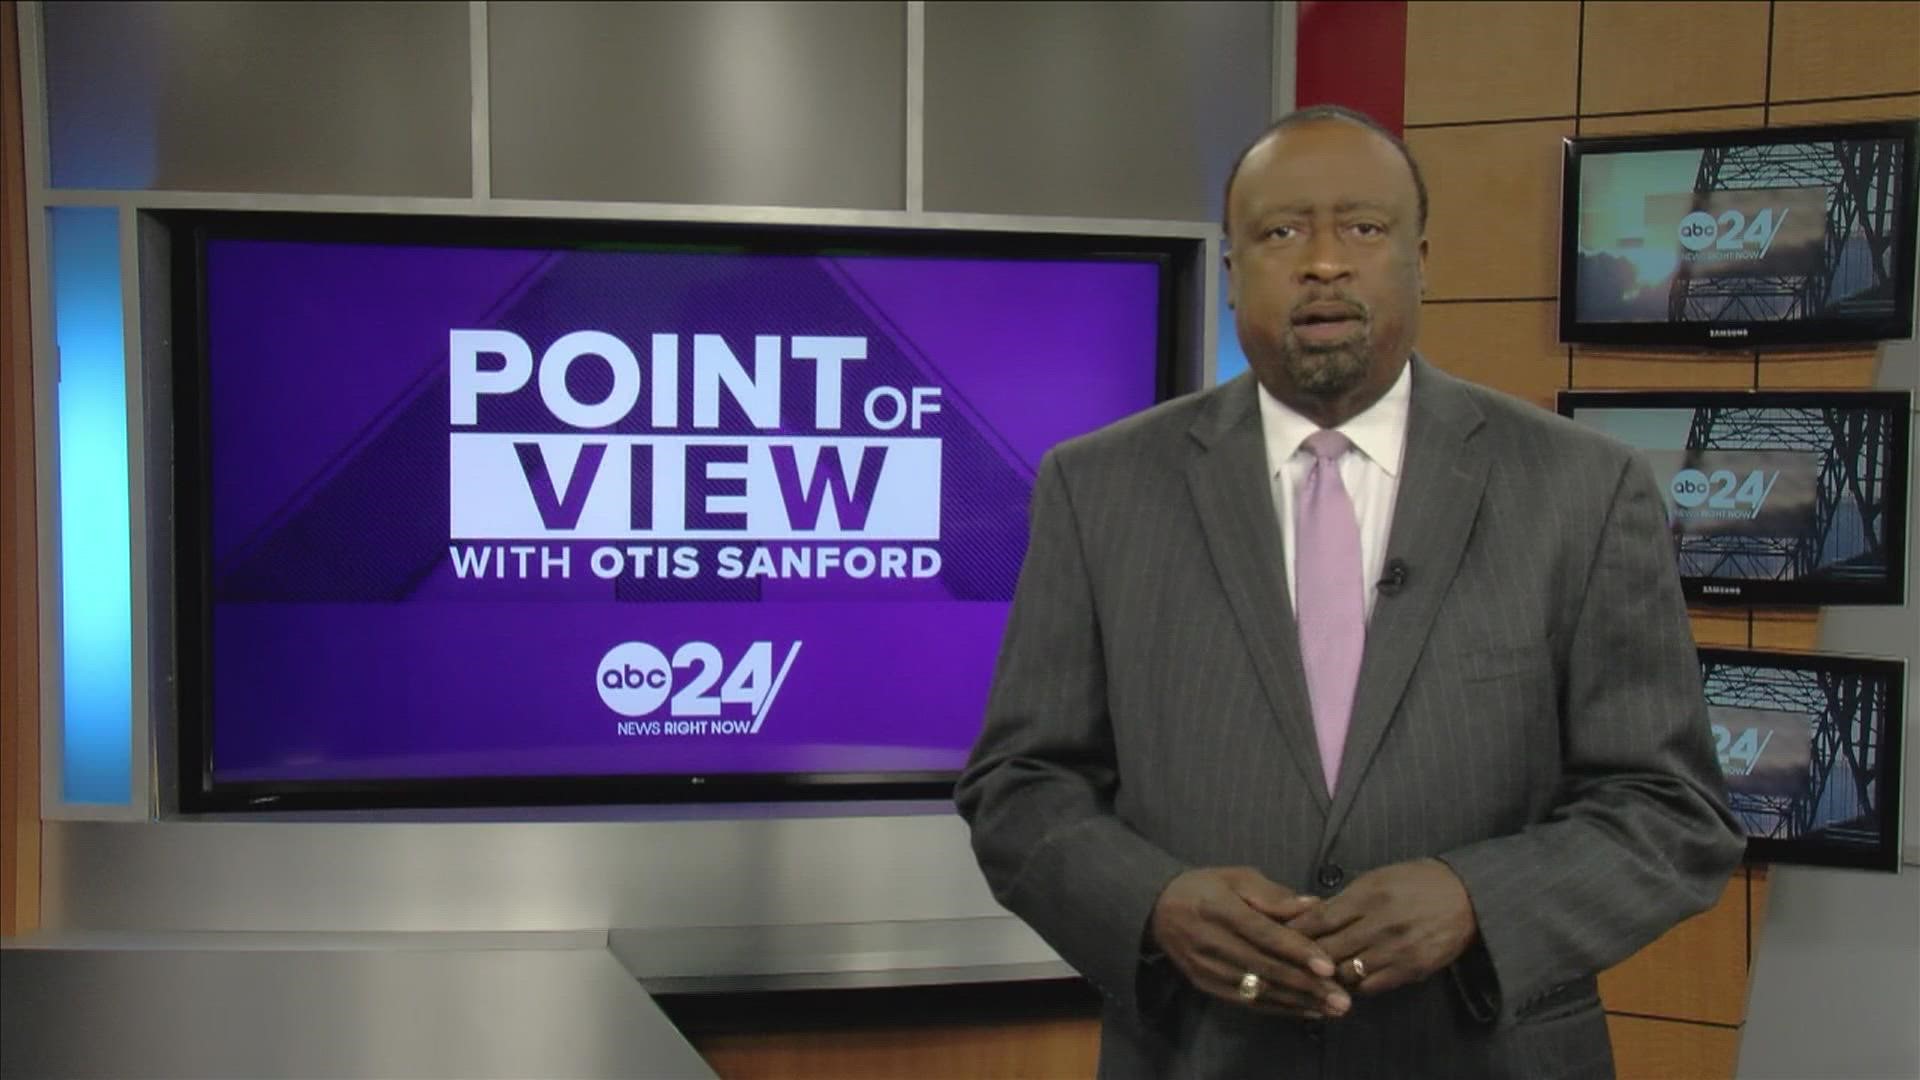 ABC24 political analyst and commentator Otis Sanford shares his point of view on the allegations against MSCS Superintendent Dr. Joris Ray.